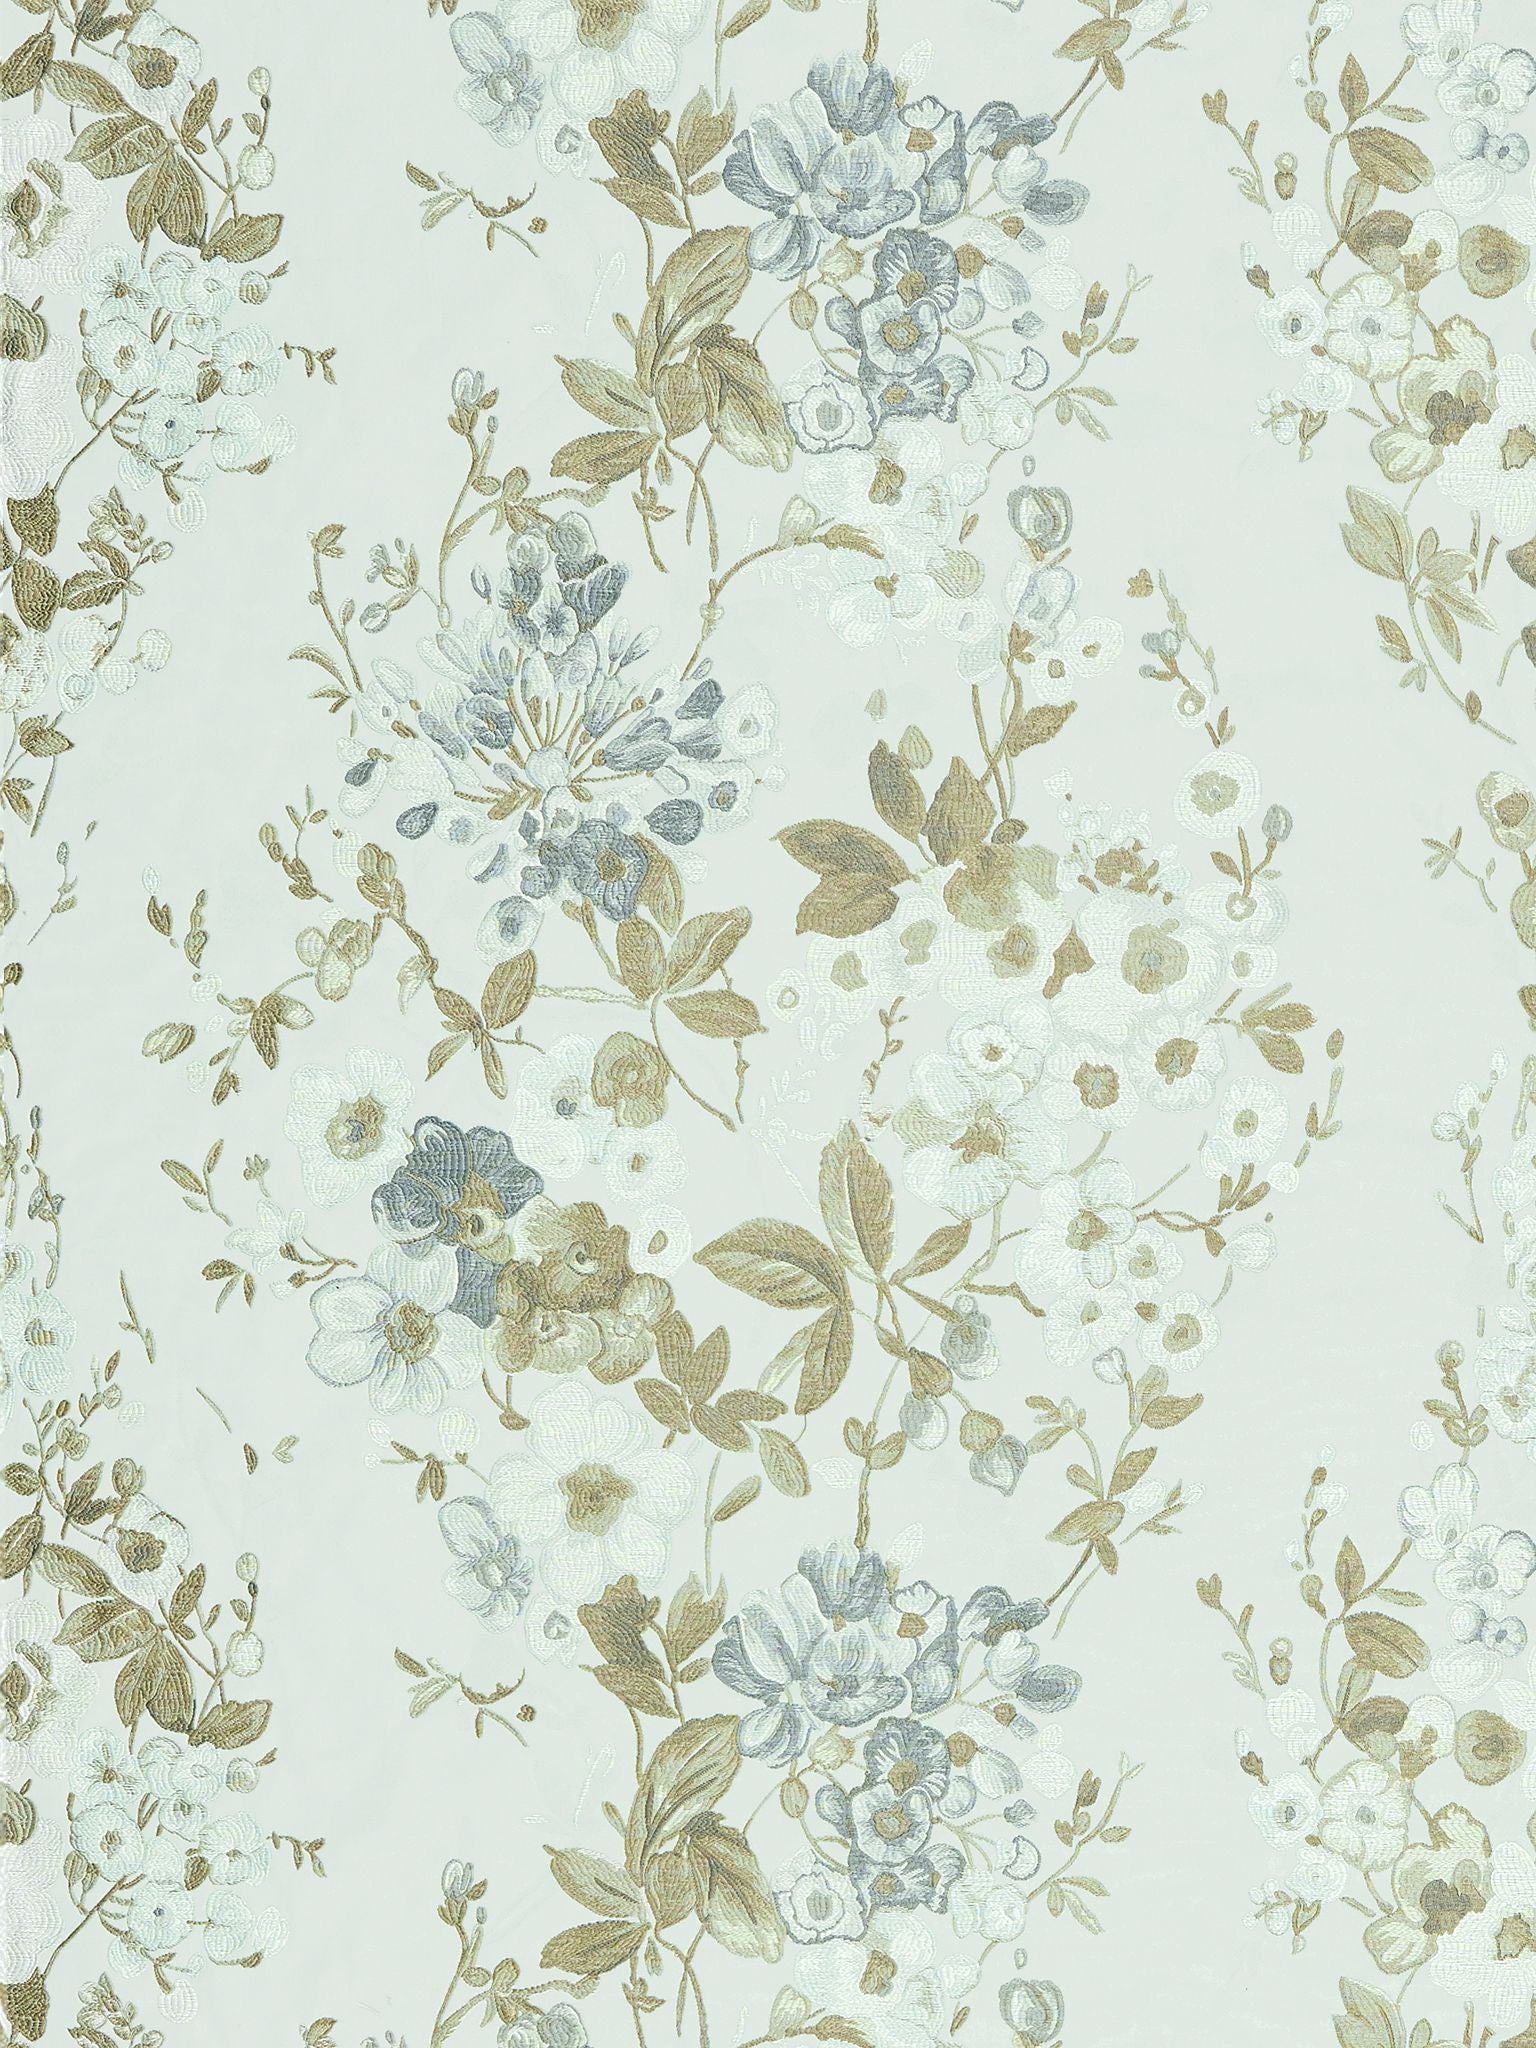 Antonella Lampas fabric in grey garden color - pattern number SC 000327224 - by Scalamandre in the Scalamandre Fabrics Book 1 collection